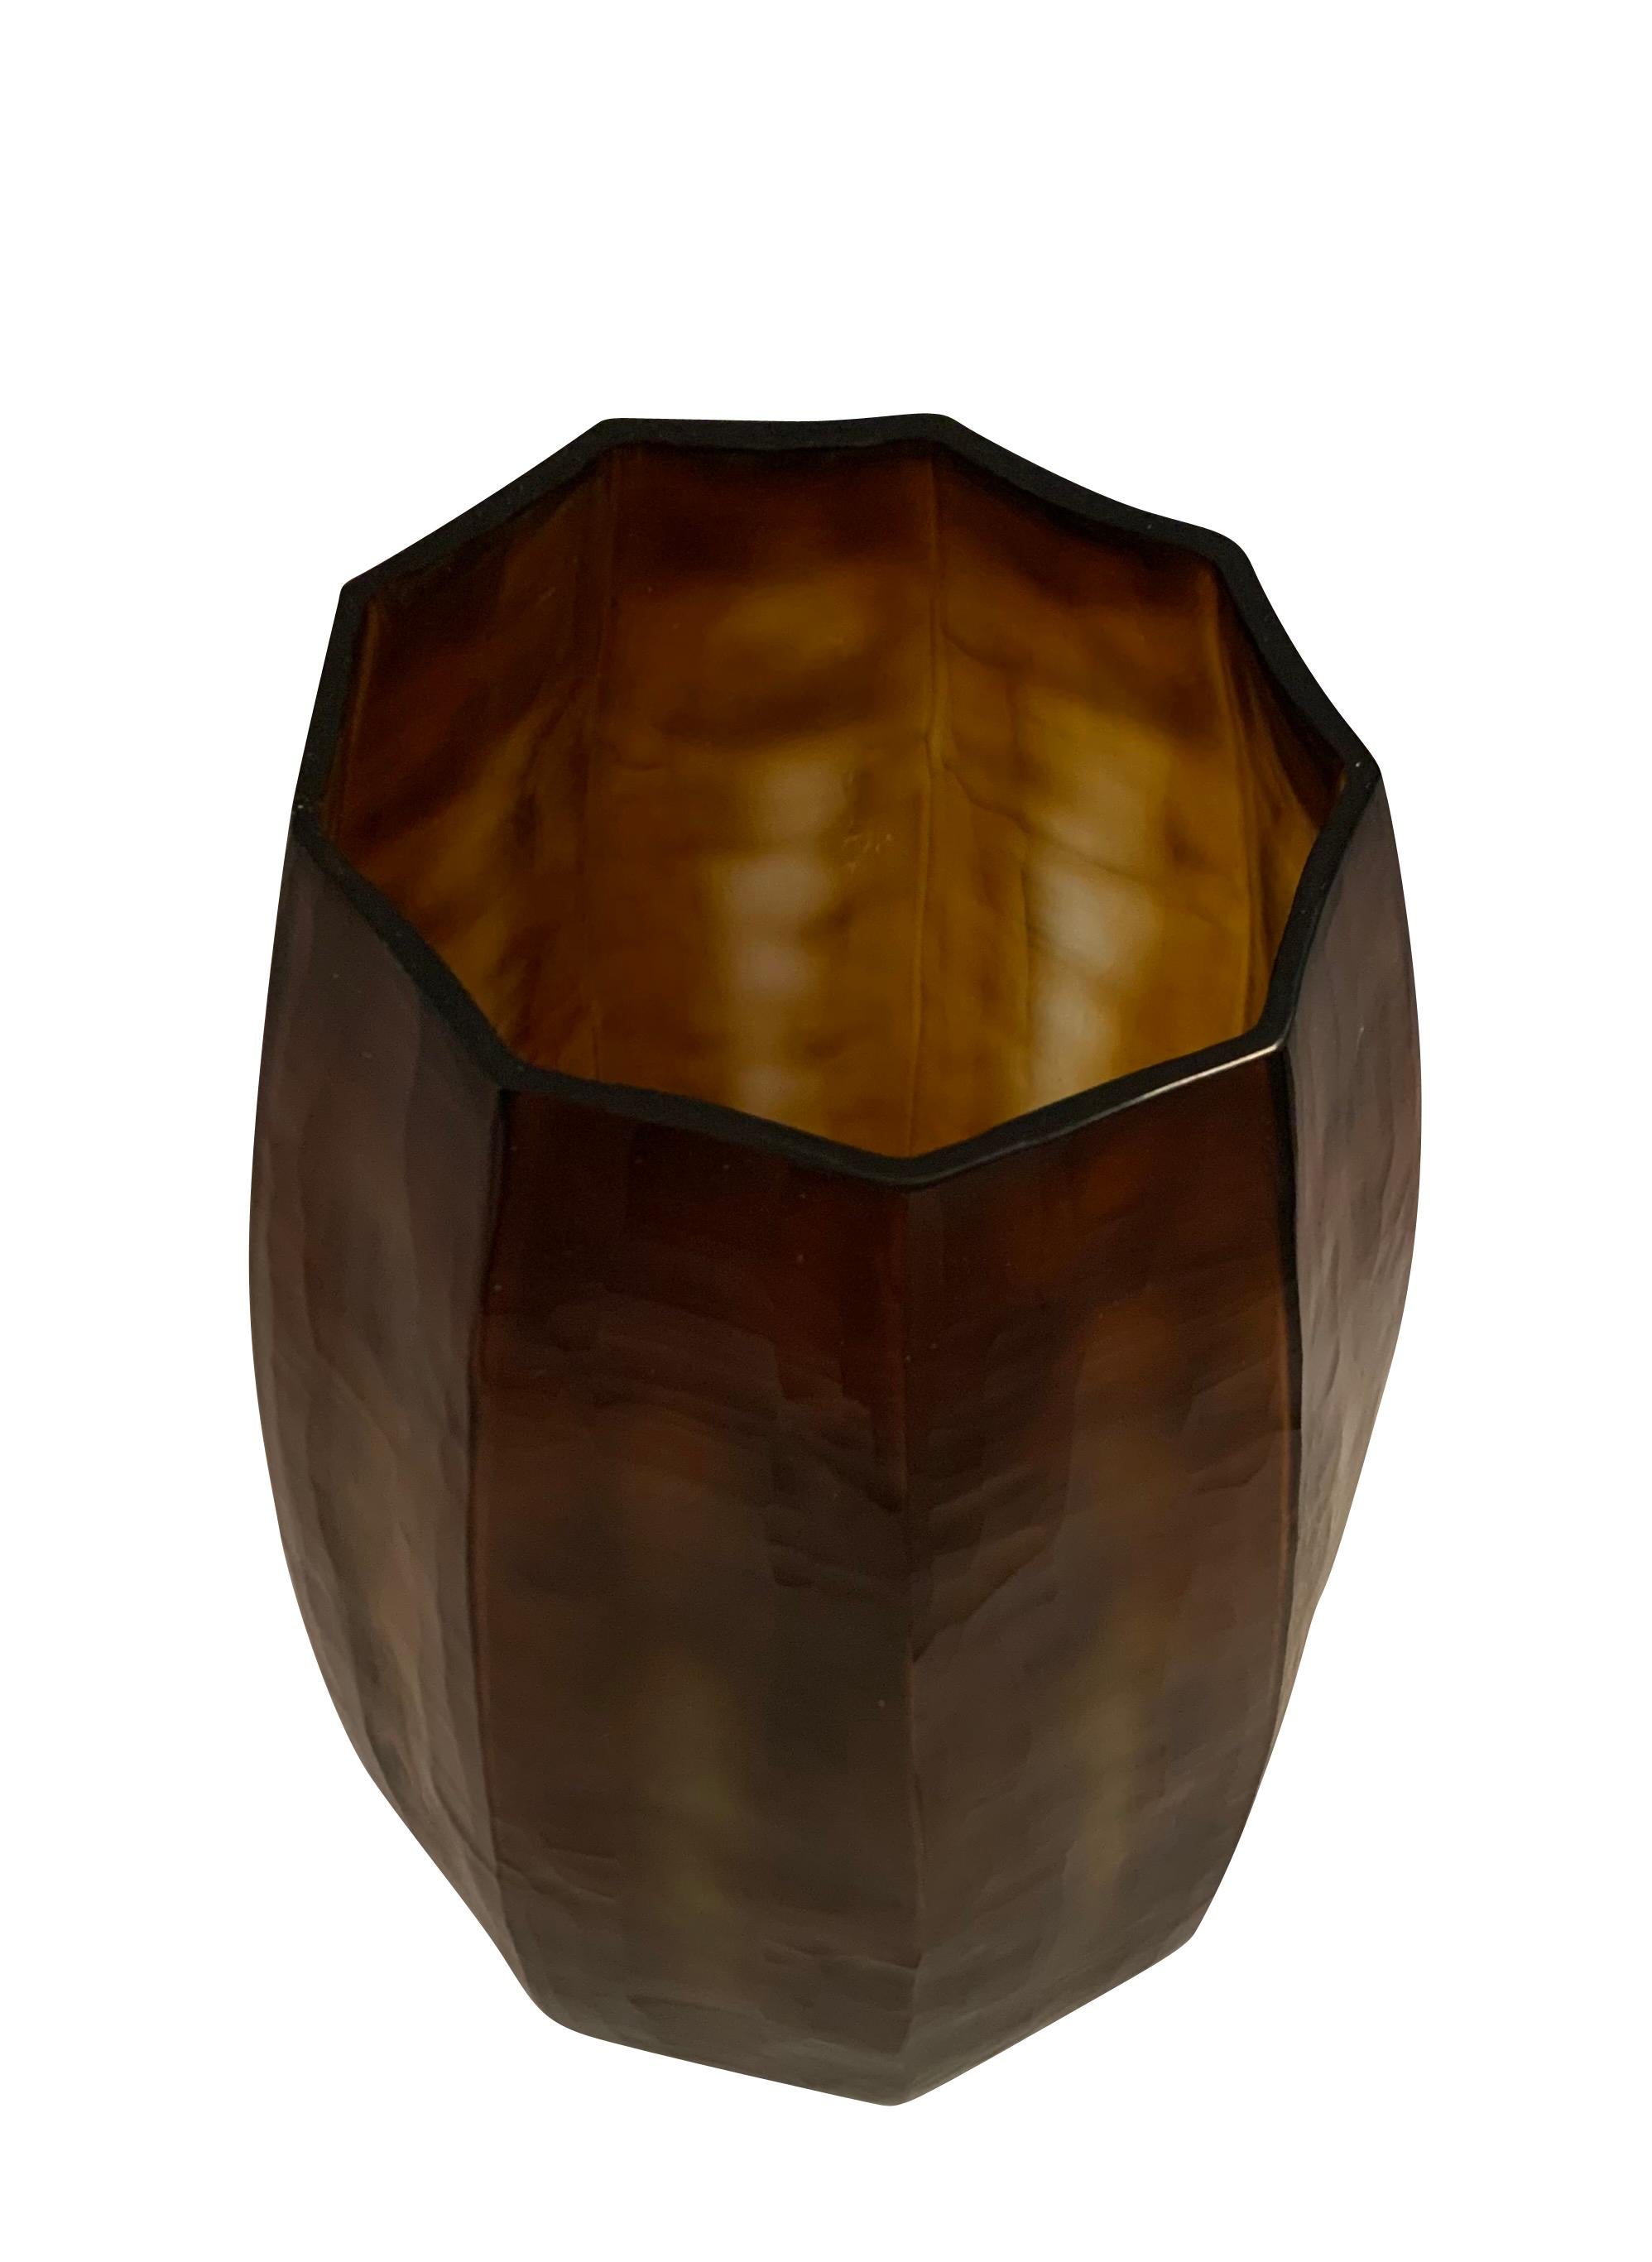 Contemporary Romanian tortoise colored glass vase.
Vertical pattern design.
Also available as a taller vase S5579.
 